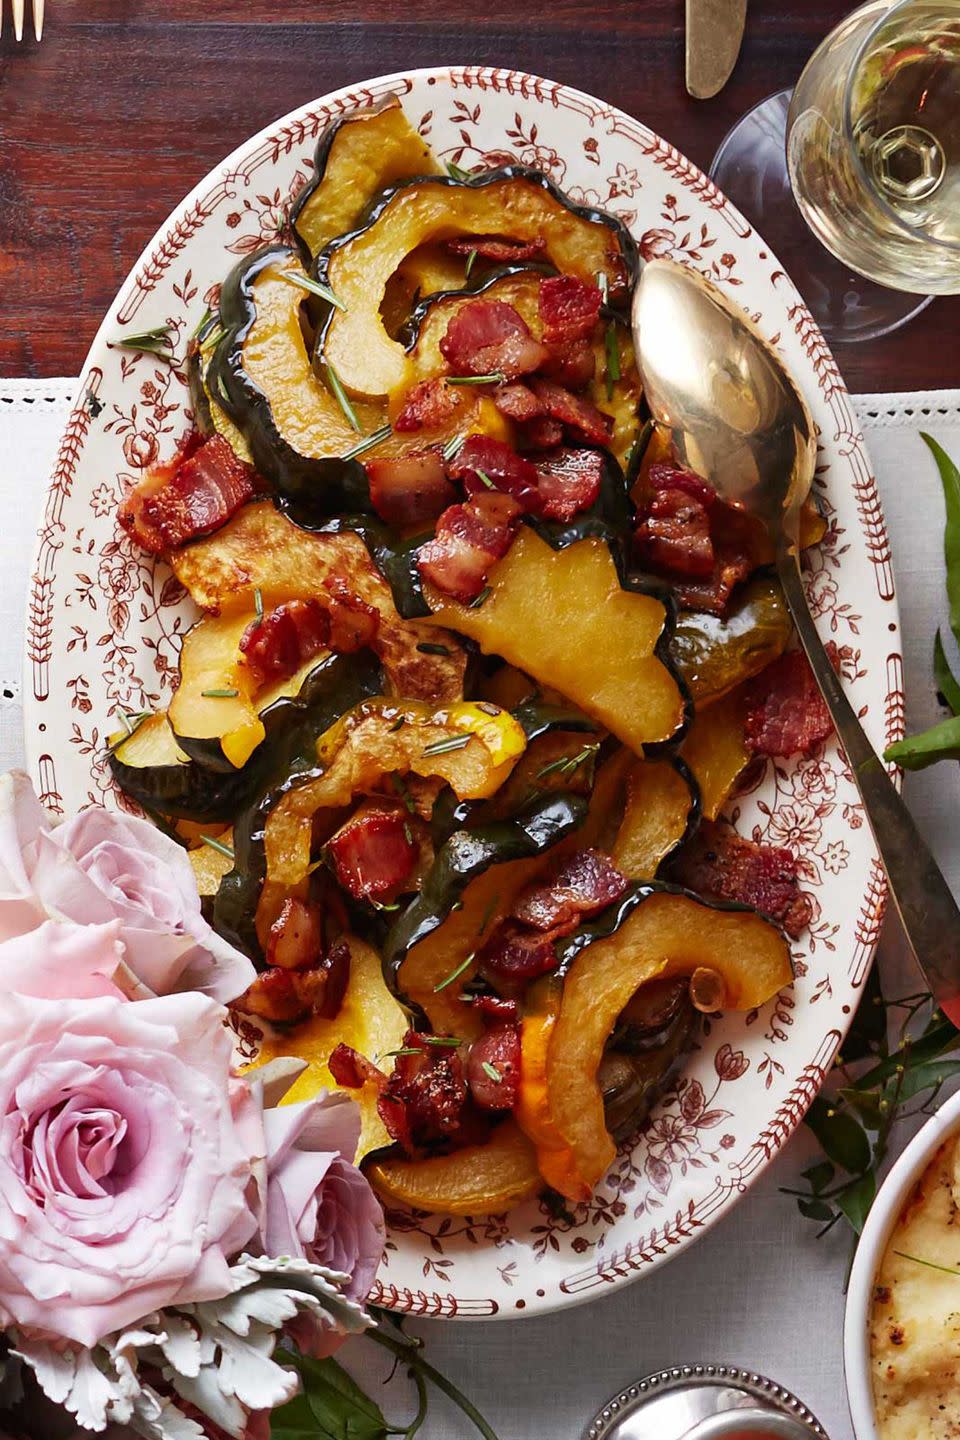 30) Roasted Acorn Squash with Maple-Bacon Drizzle